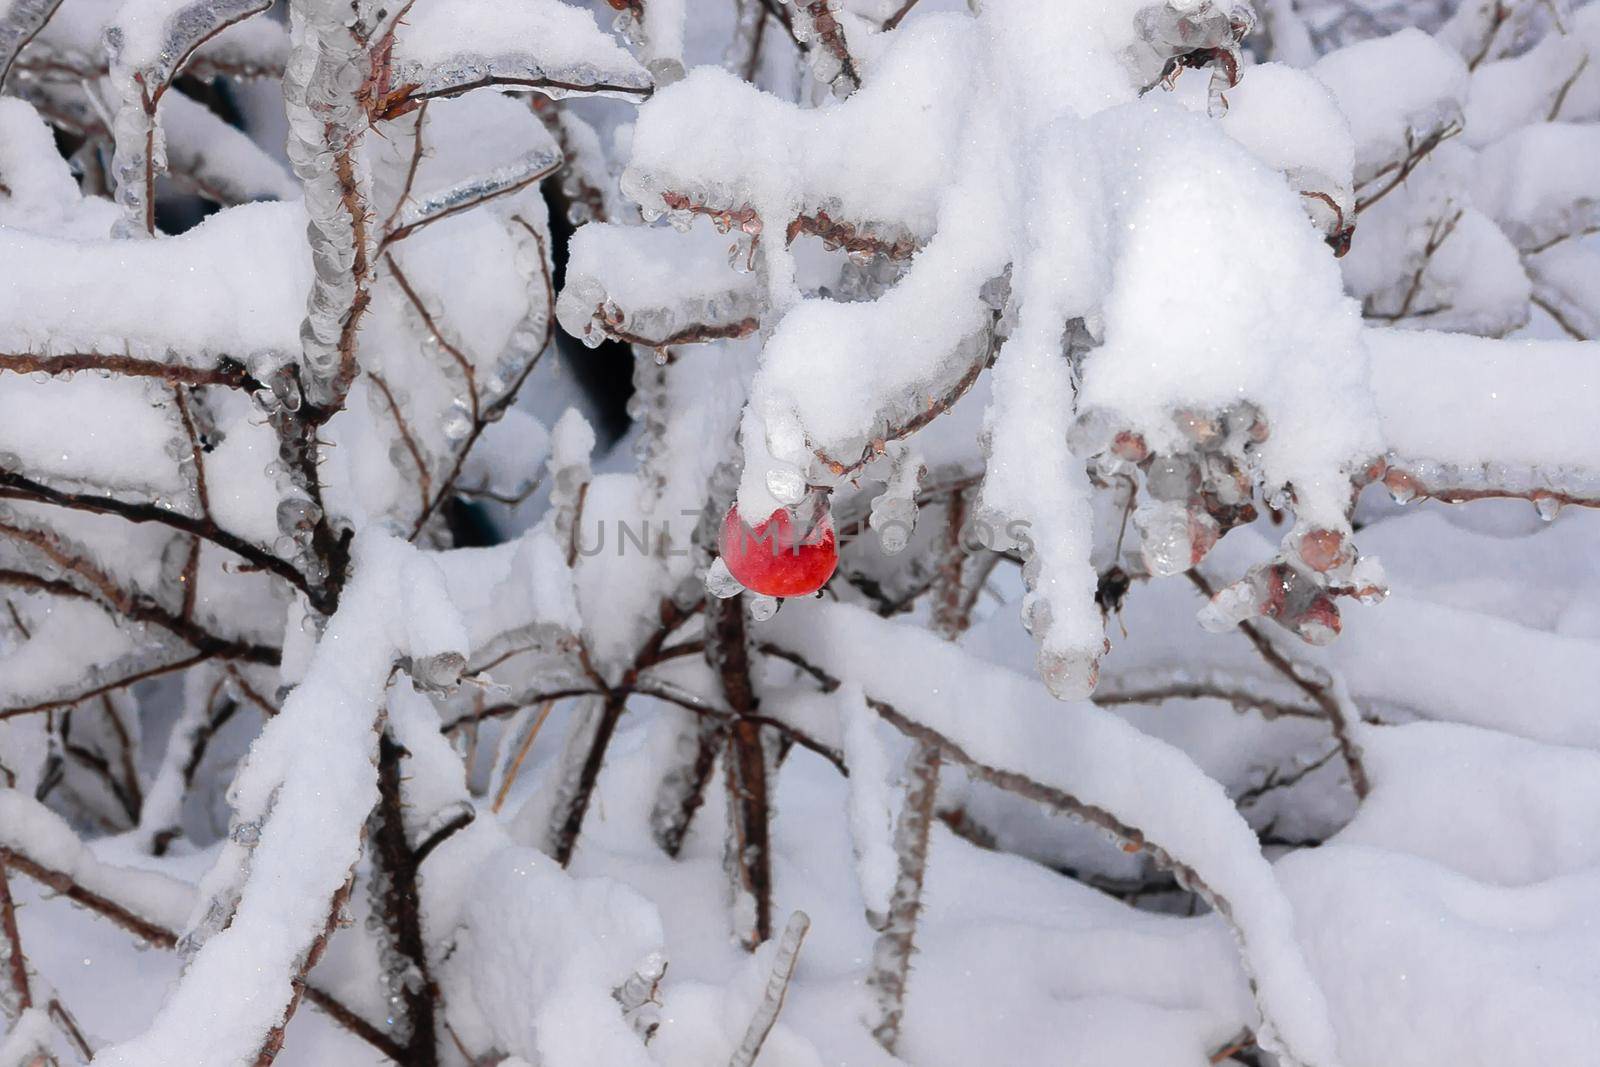 Heavy, icy branches of trees in winter with red apple by Yurich32